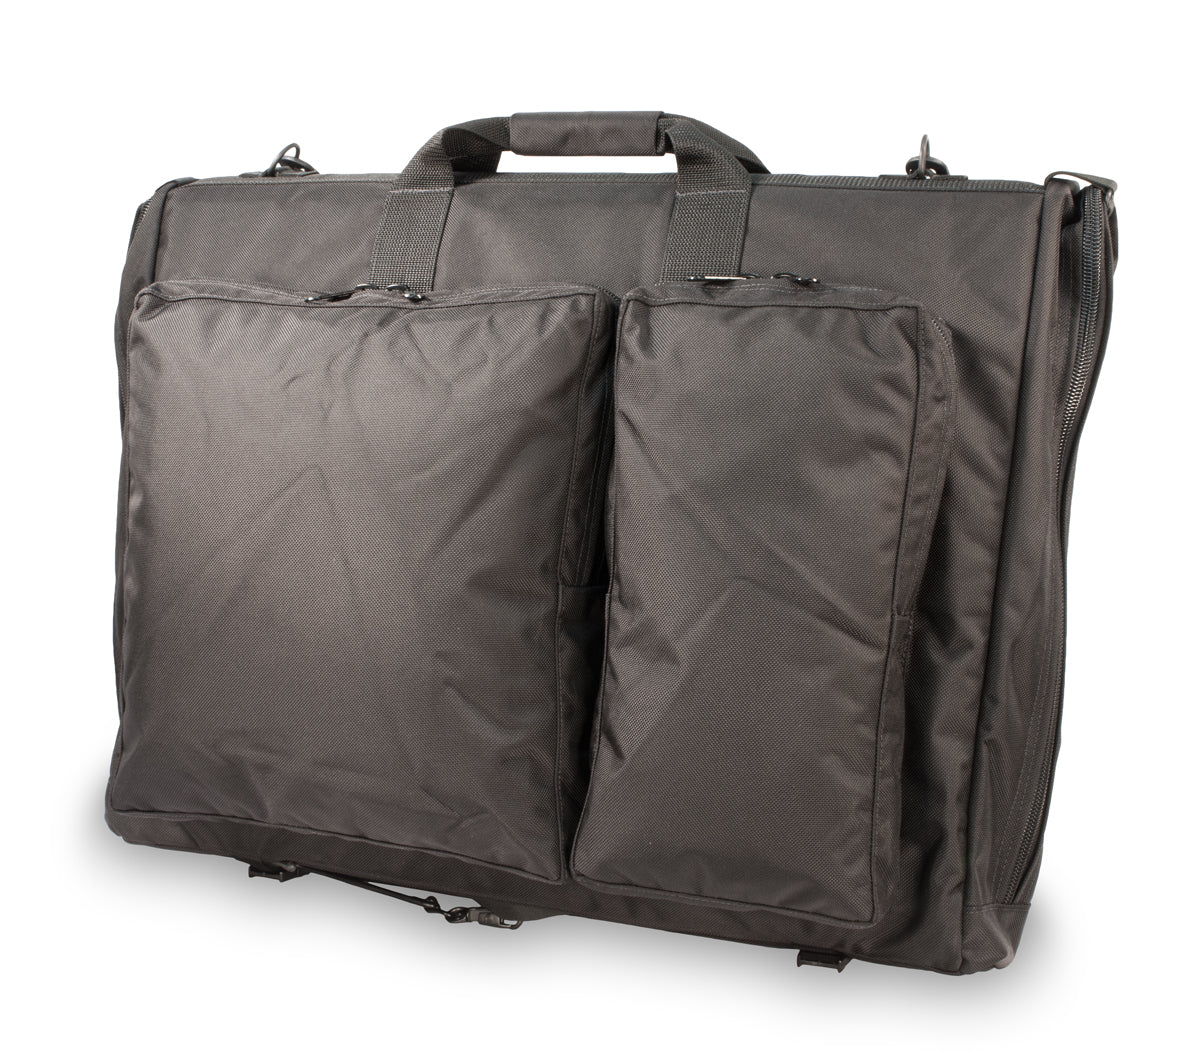 Deluxe garment bag. Pictured closed with two pockets.